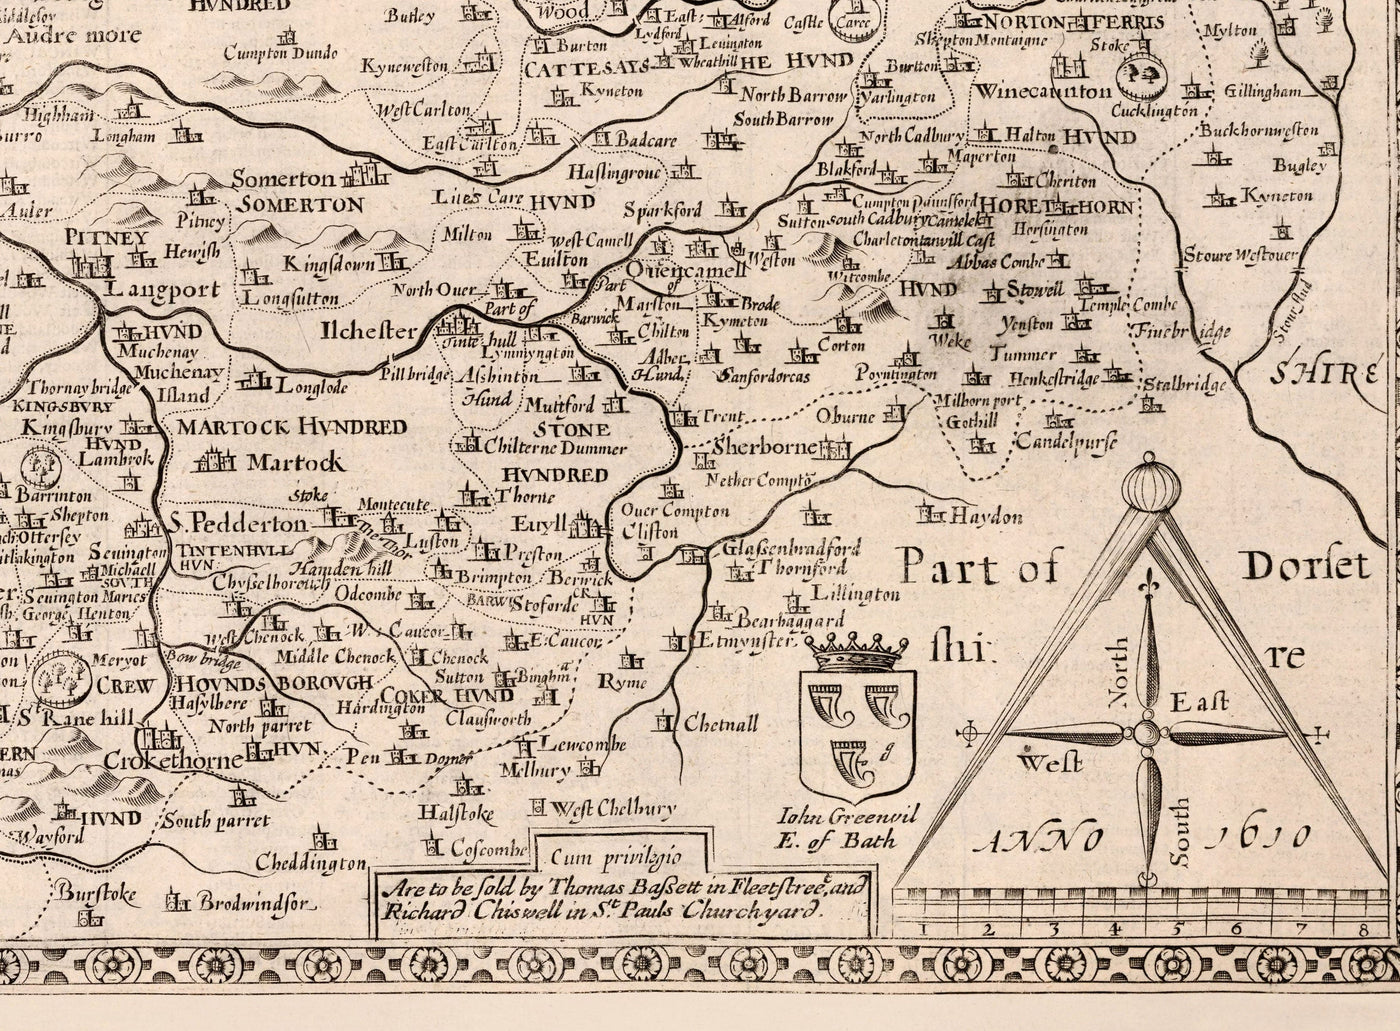 Old Map of Somerset in 1611 by John Speed - Bath, Portishead, Weston-Super-Mare, Taunton, Yeovil